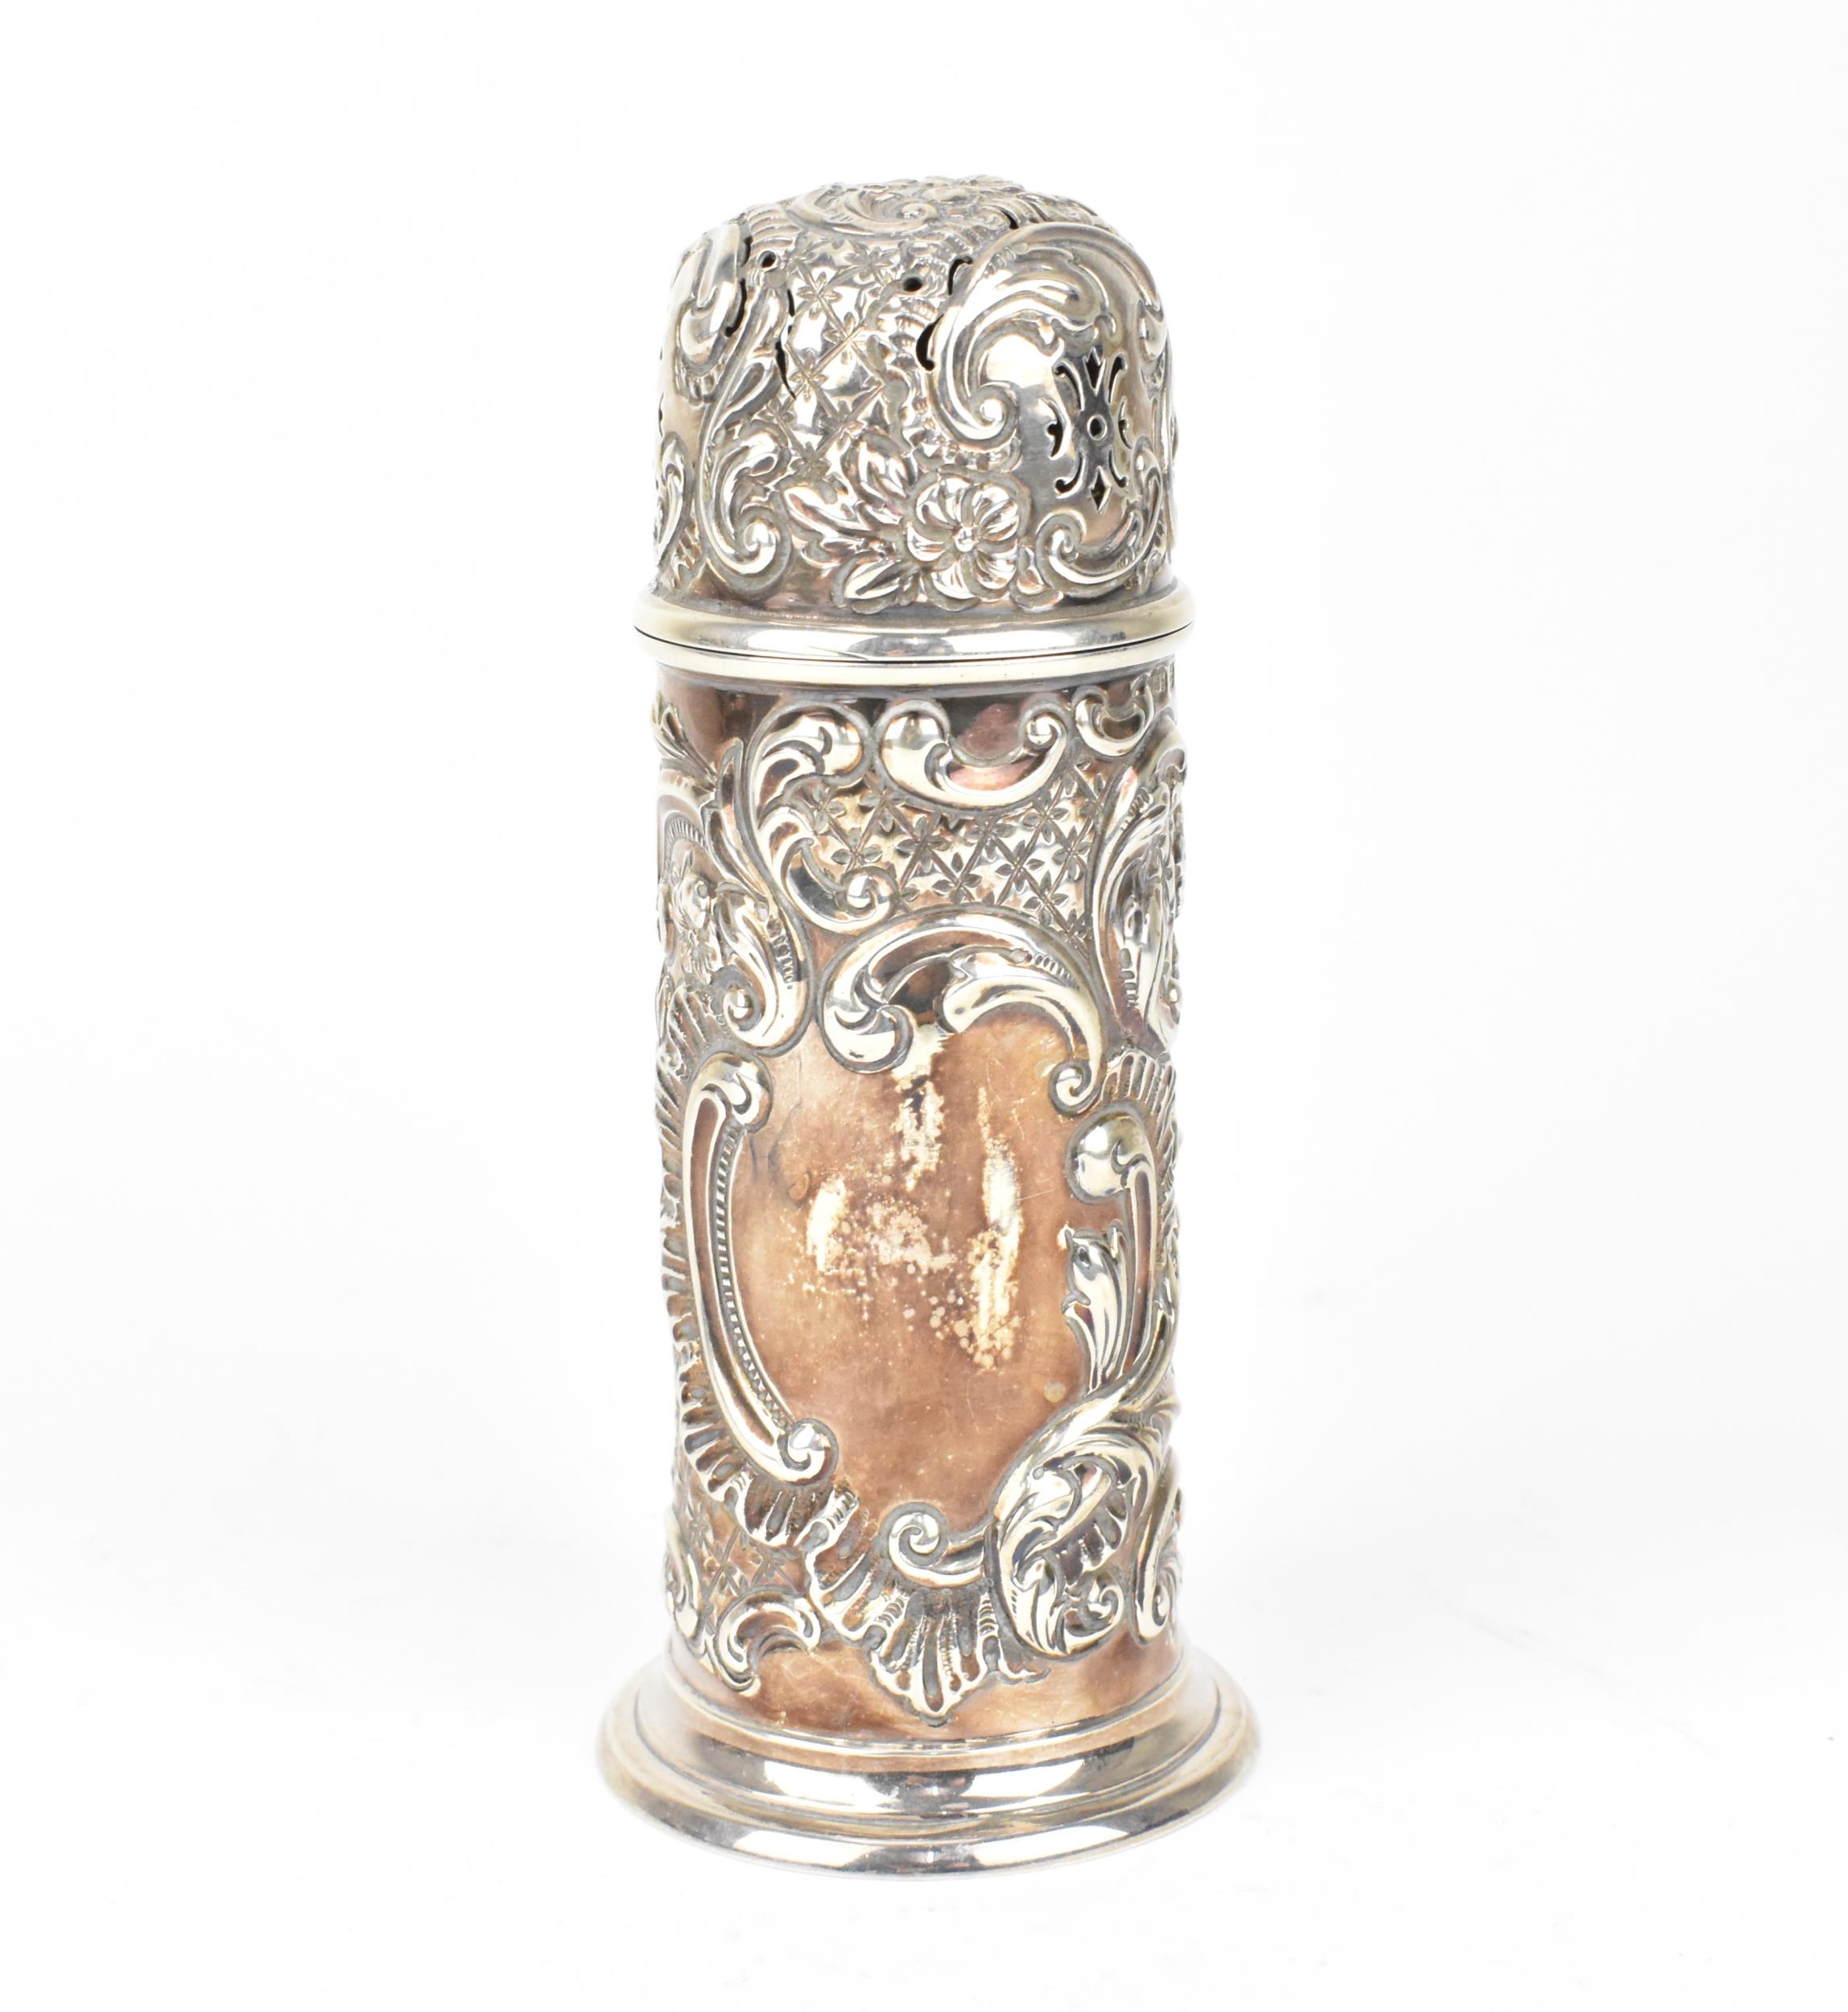 An Edwardian silver sugar sifter by Thomas Hayes, Birmingham 1901, in the lighthouse form with